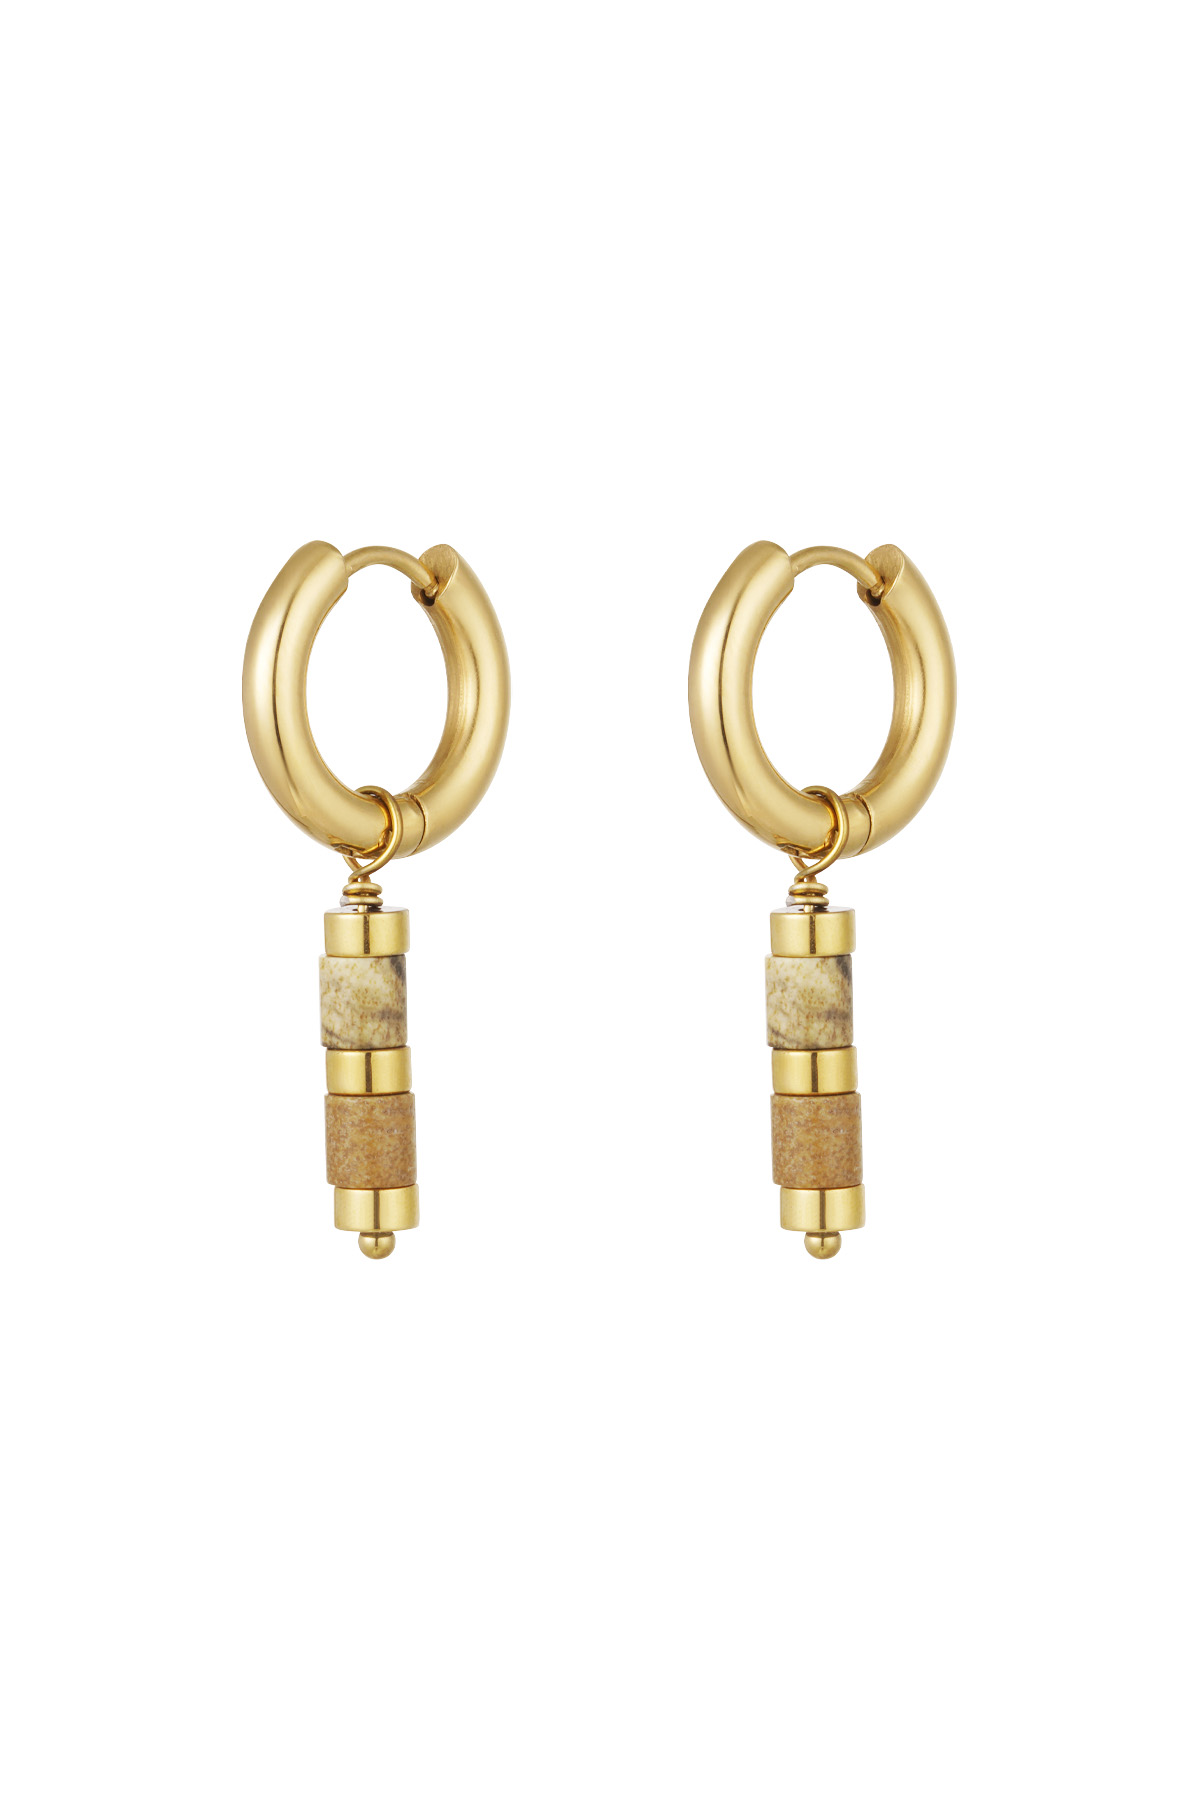 Earrings with beads and gold details - gold/beige